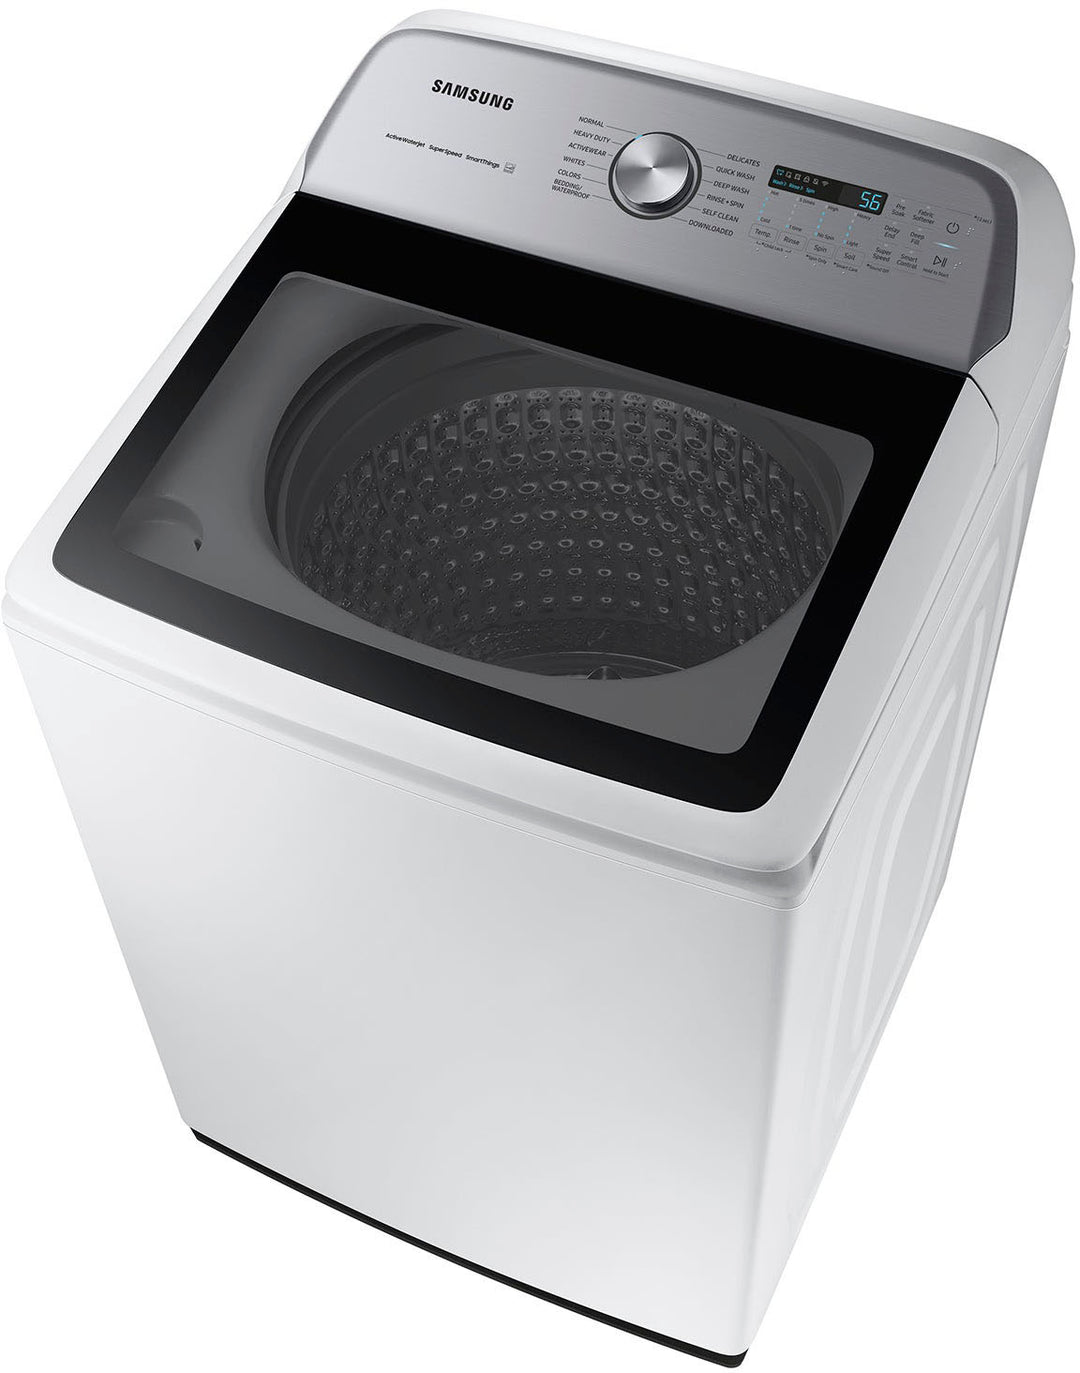 Samsung - 5.2 Cu. Ft. High-Efficiency Smart Top Load Washer with Super Speed Wash - White_4